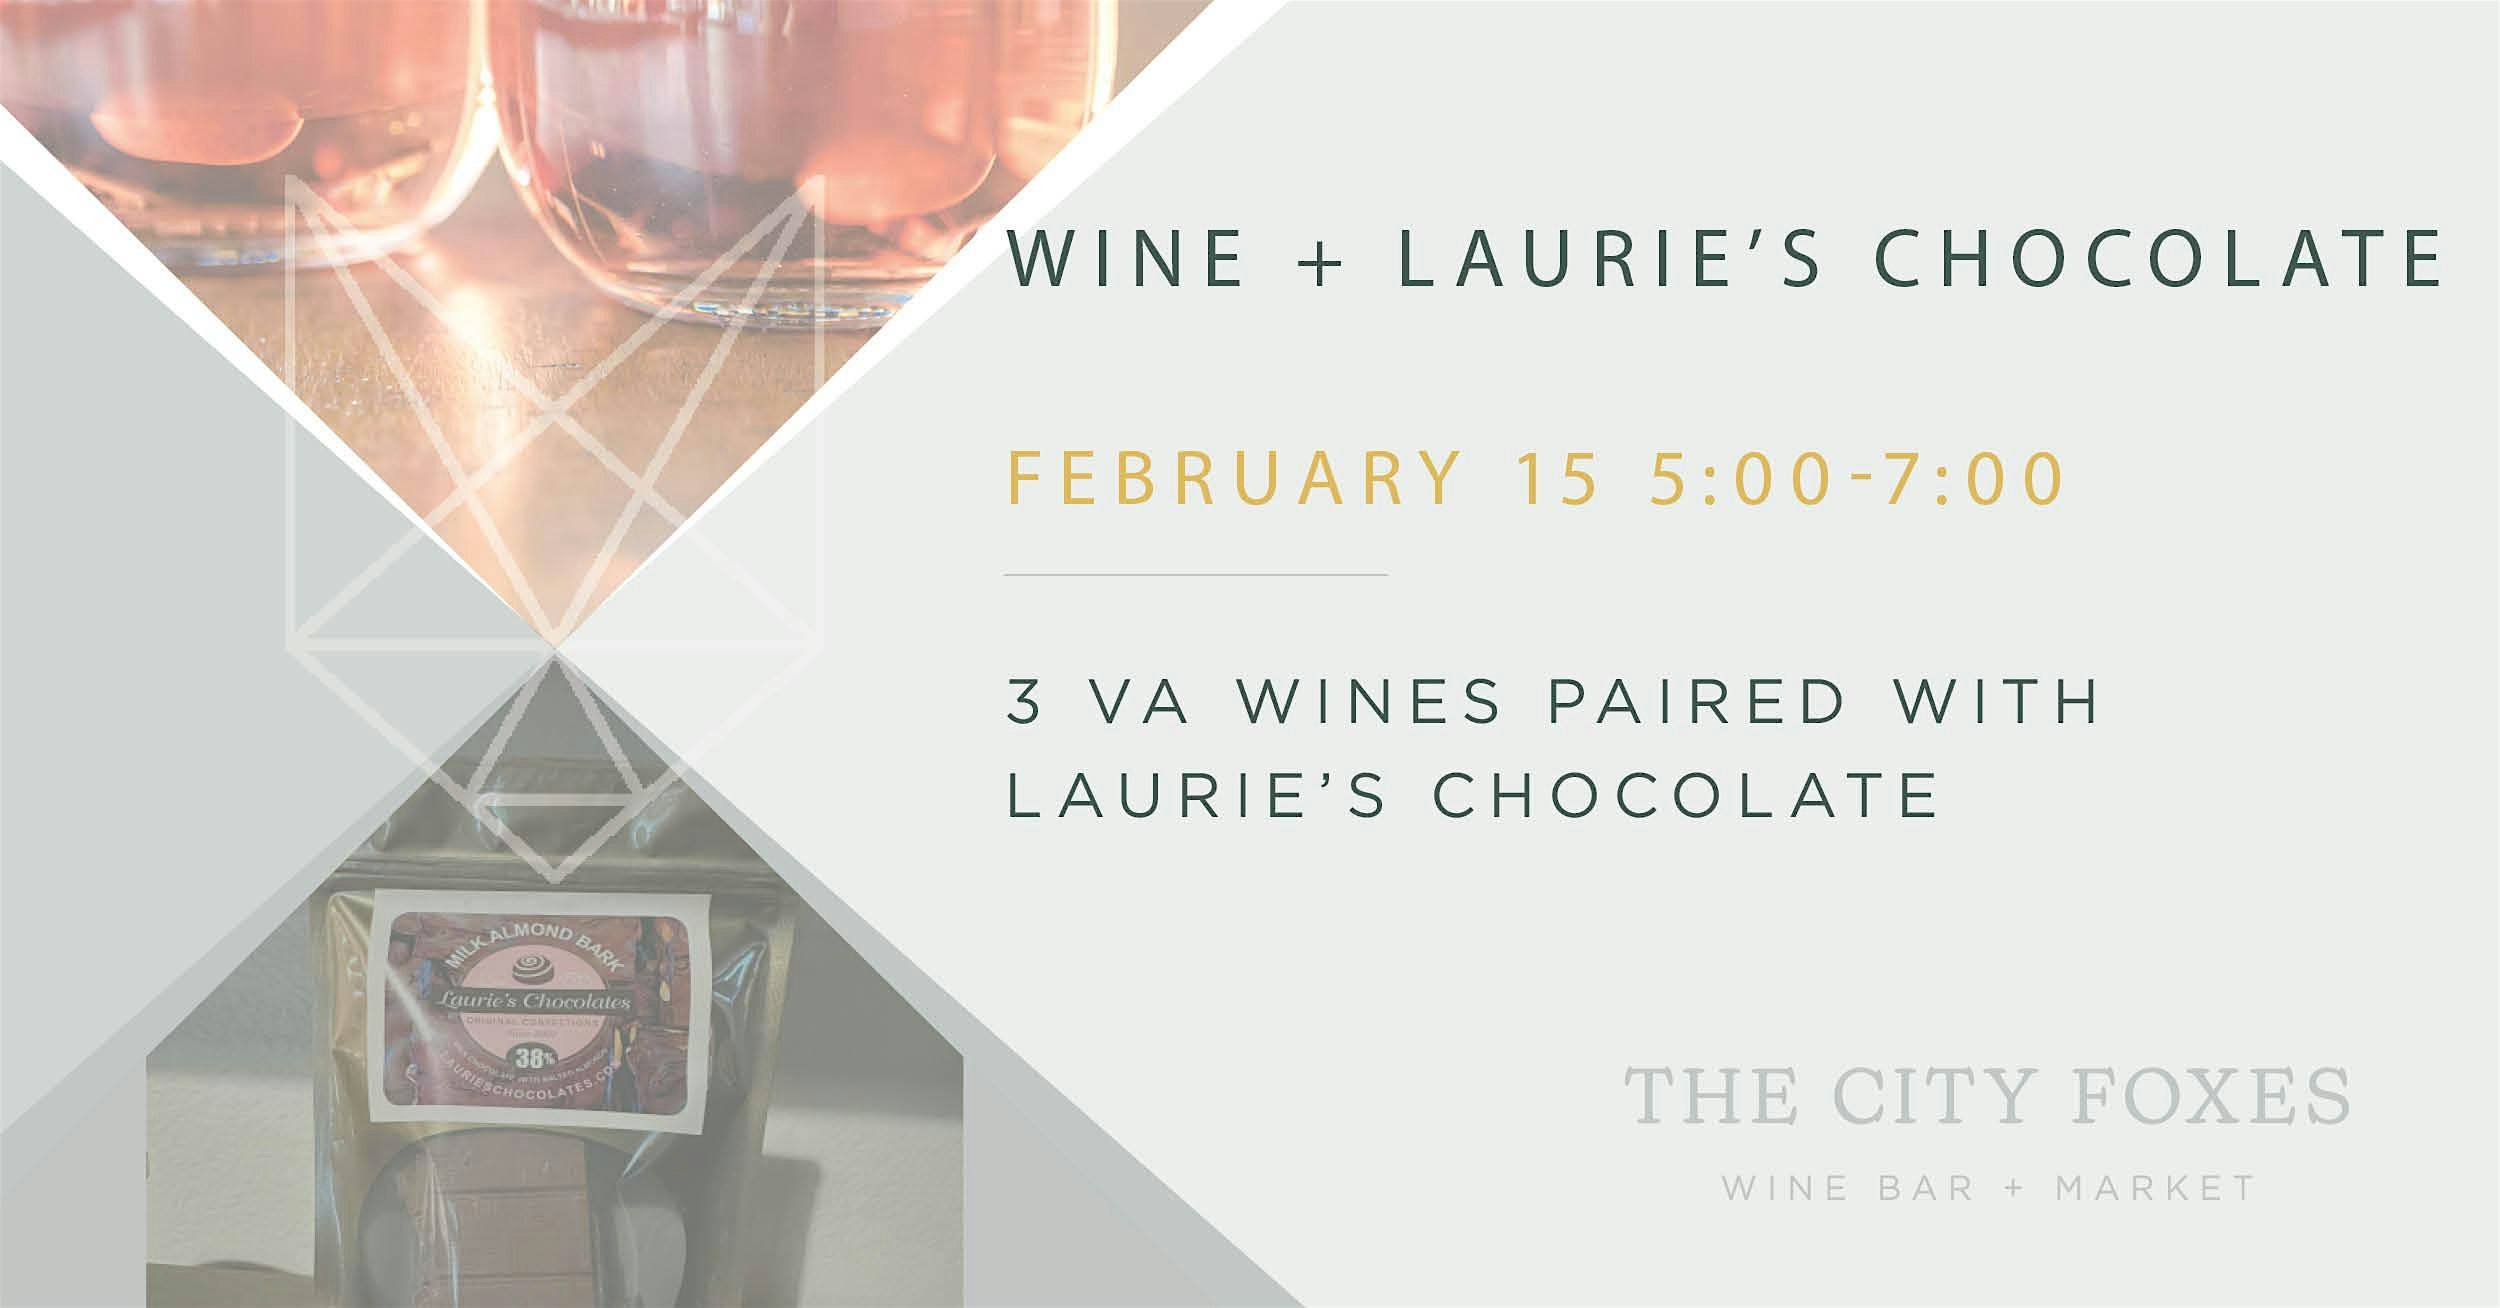 Wine + Laurie’s Chocolate